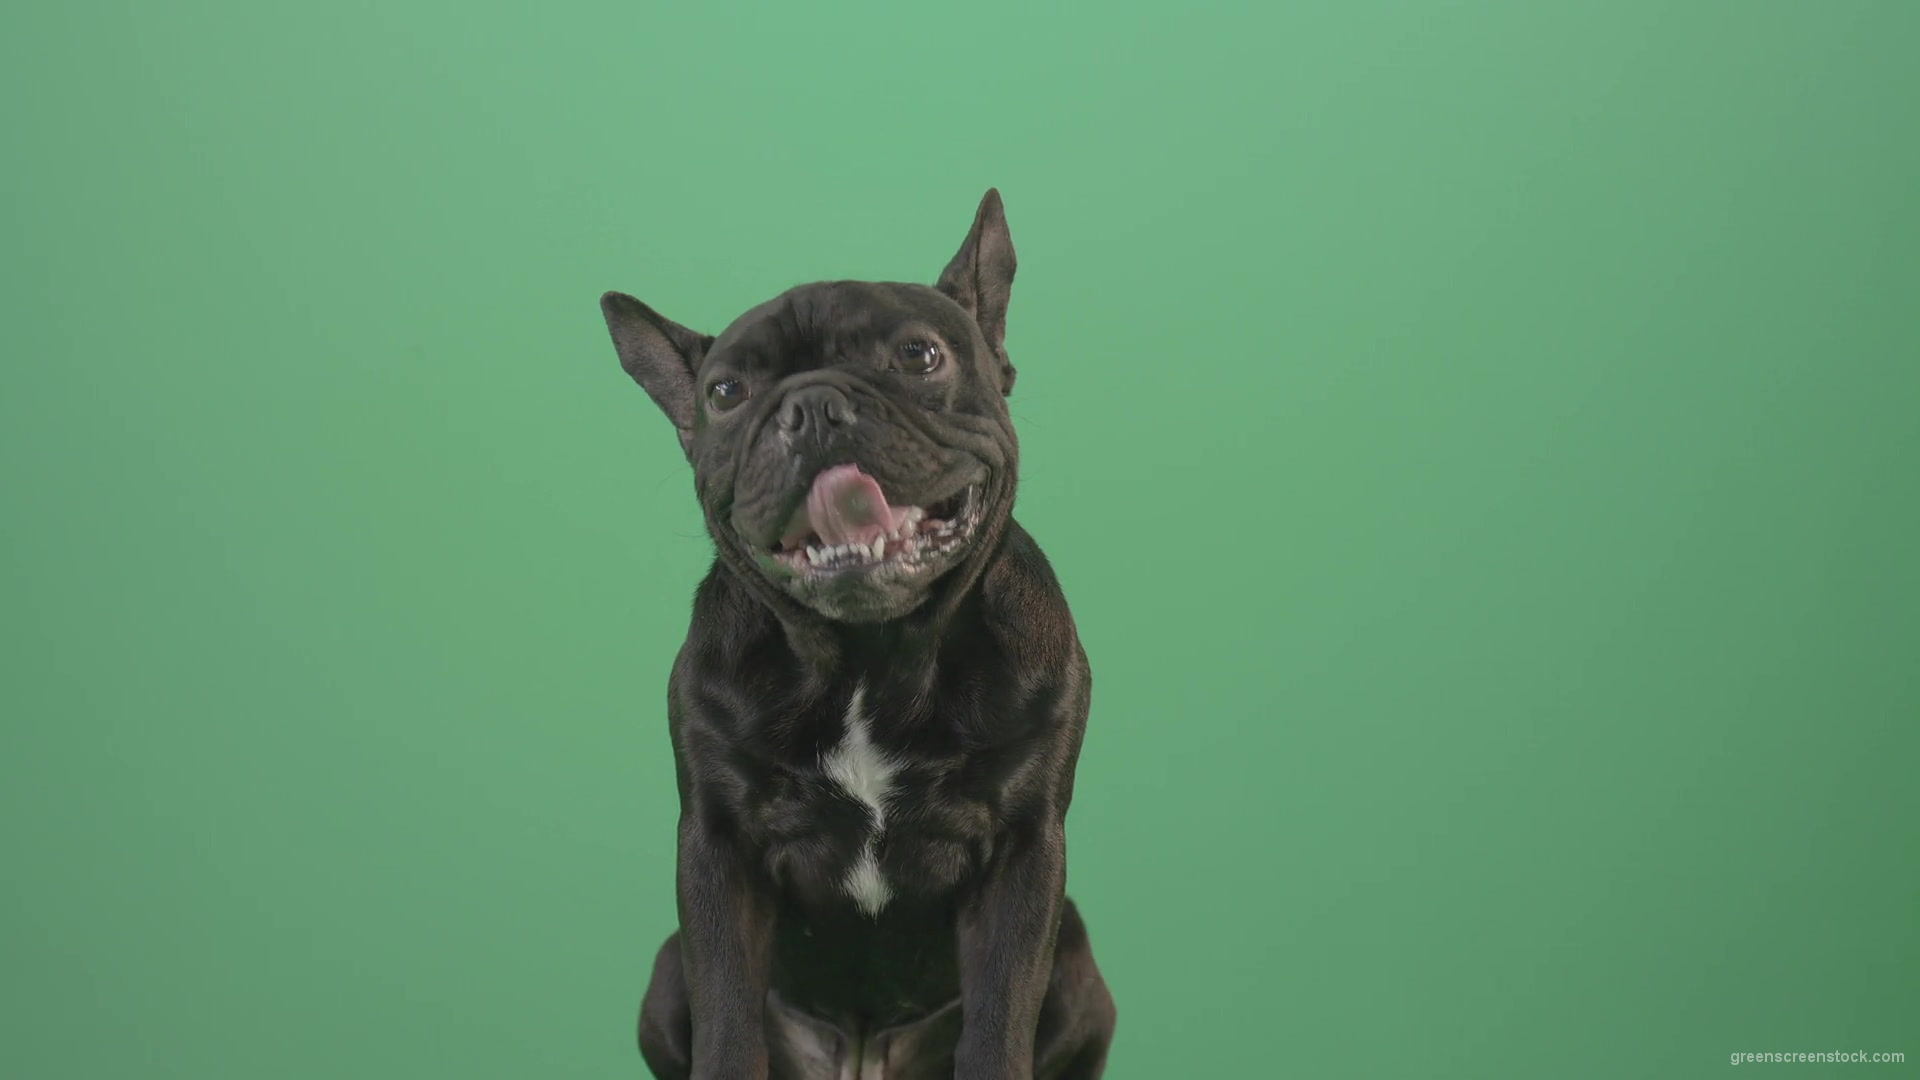 Hard-breathing-french-black-bull-dog-over-green-screen-4K-Video-Footage-1920_004 Green Screen Stock